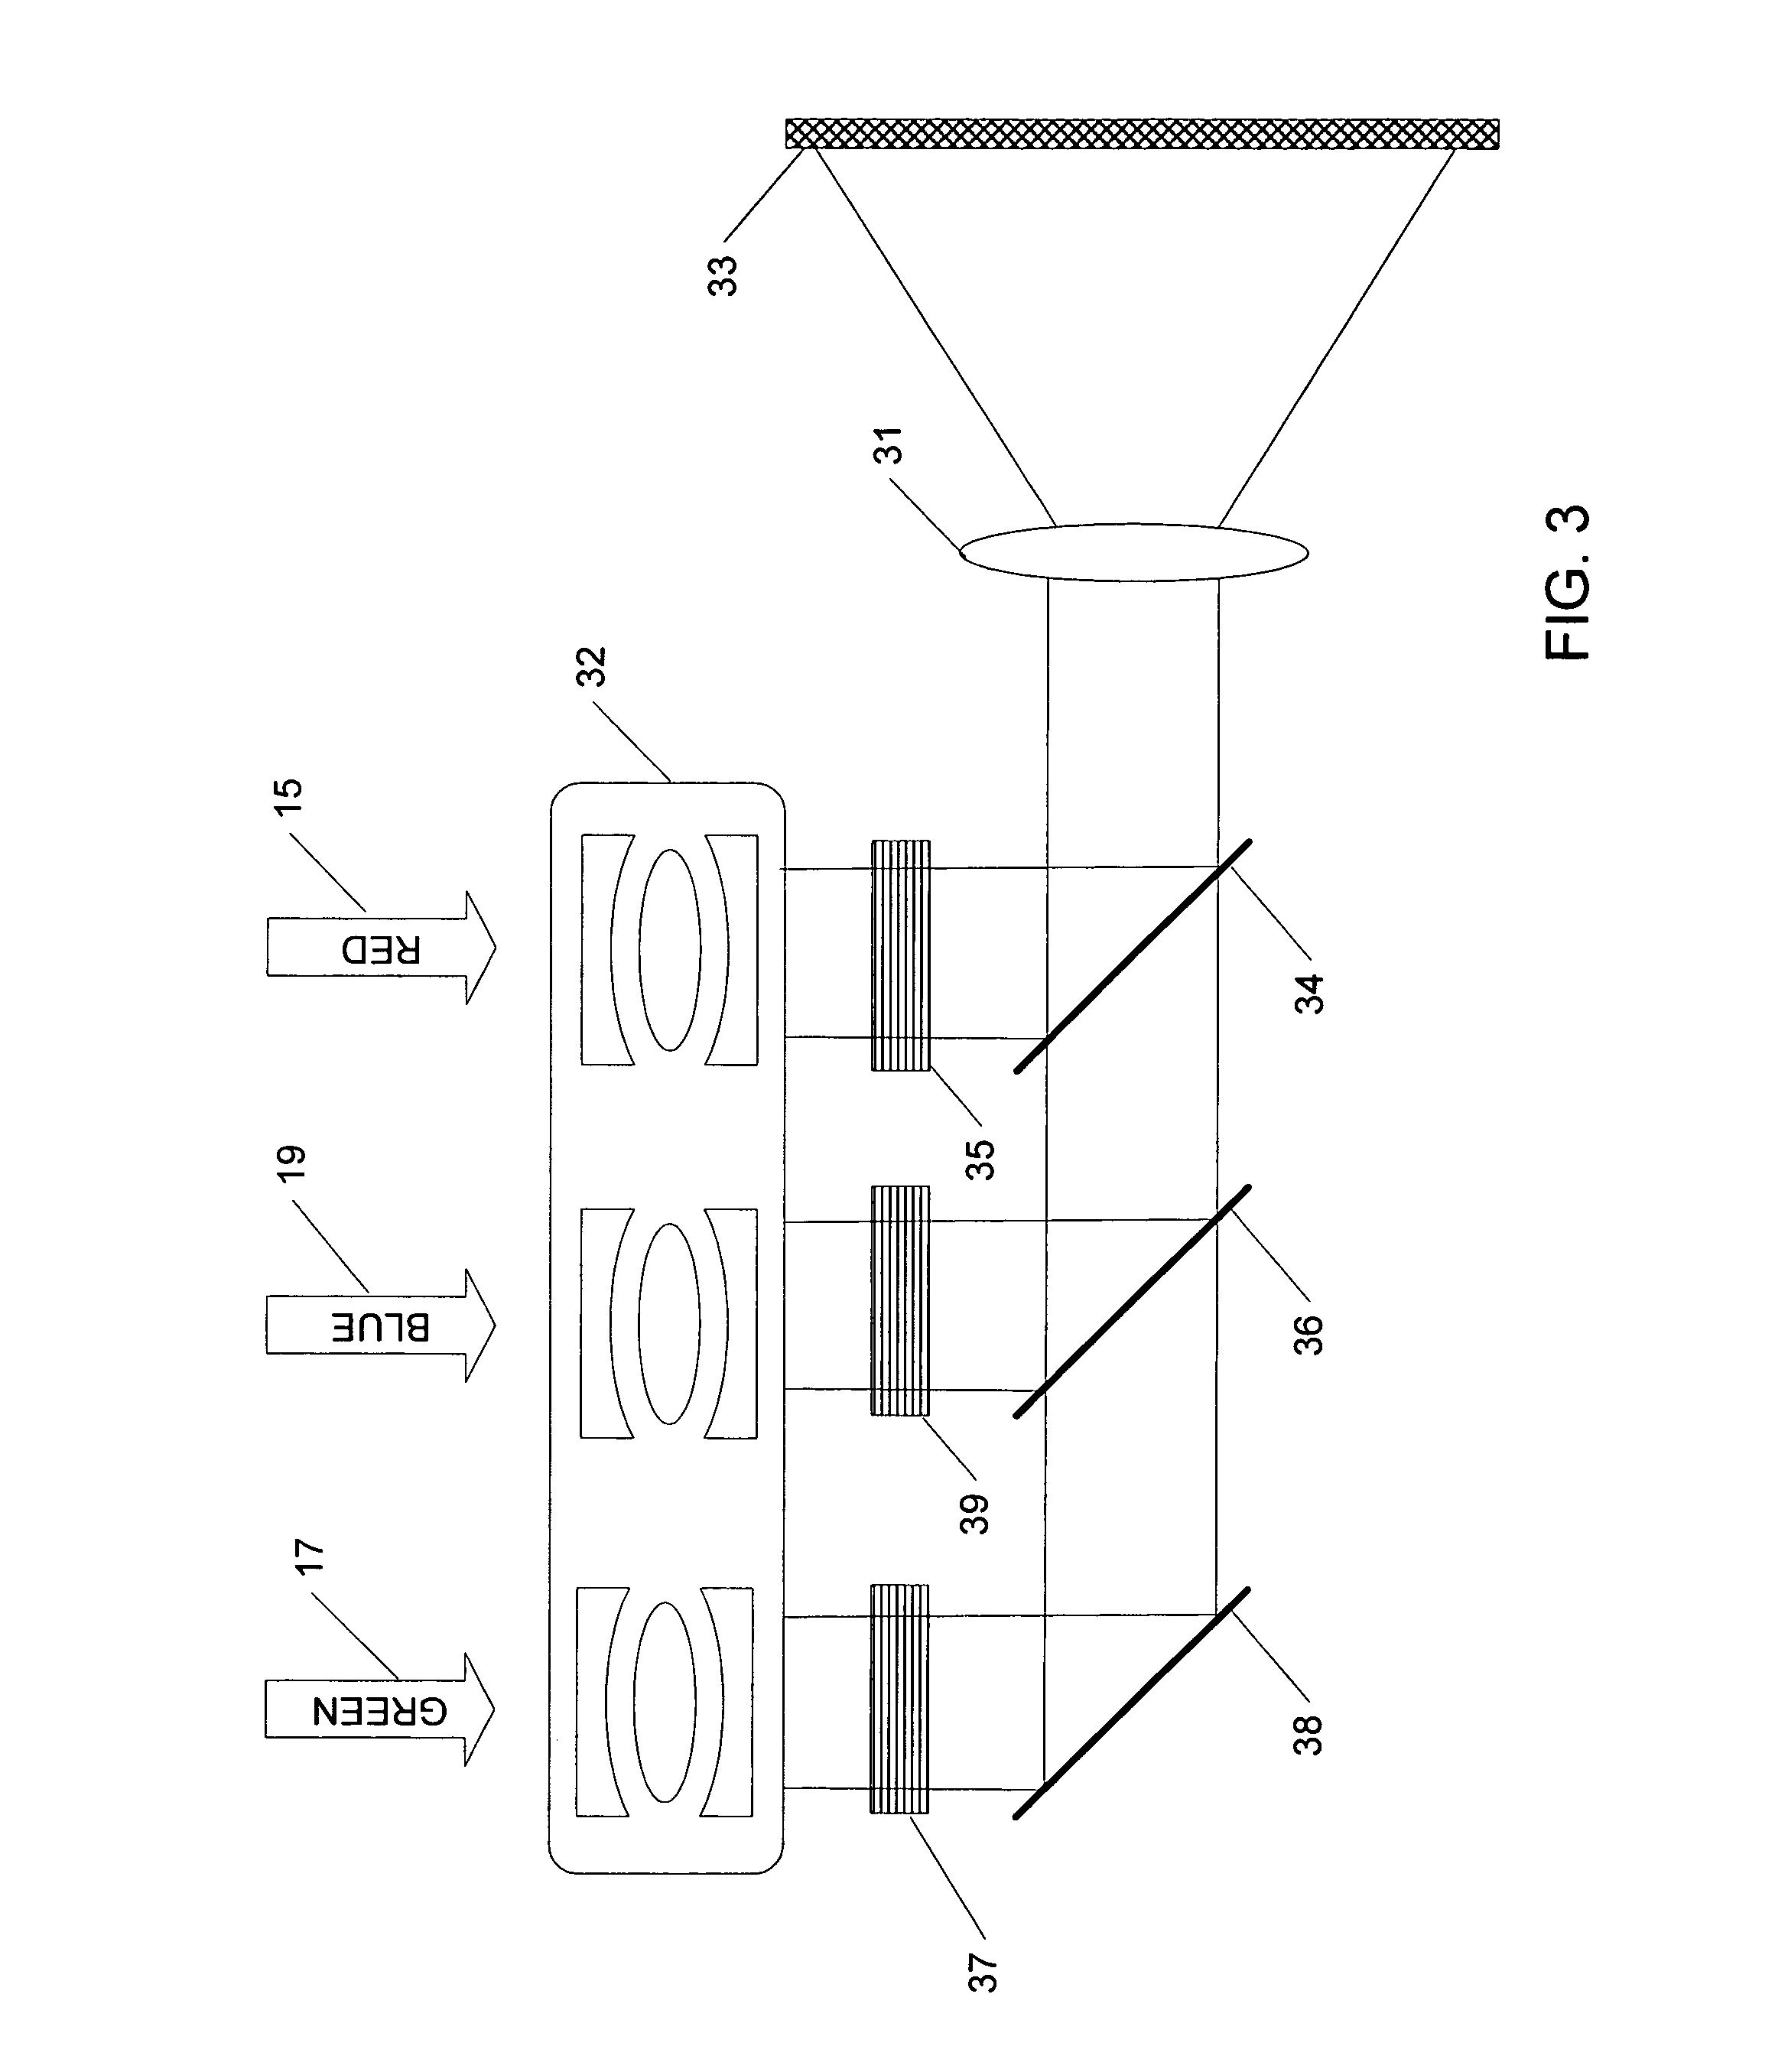 Laser video projection system and method with anti-piracy feature